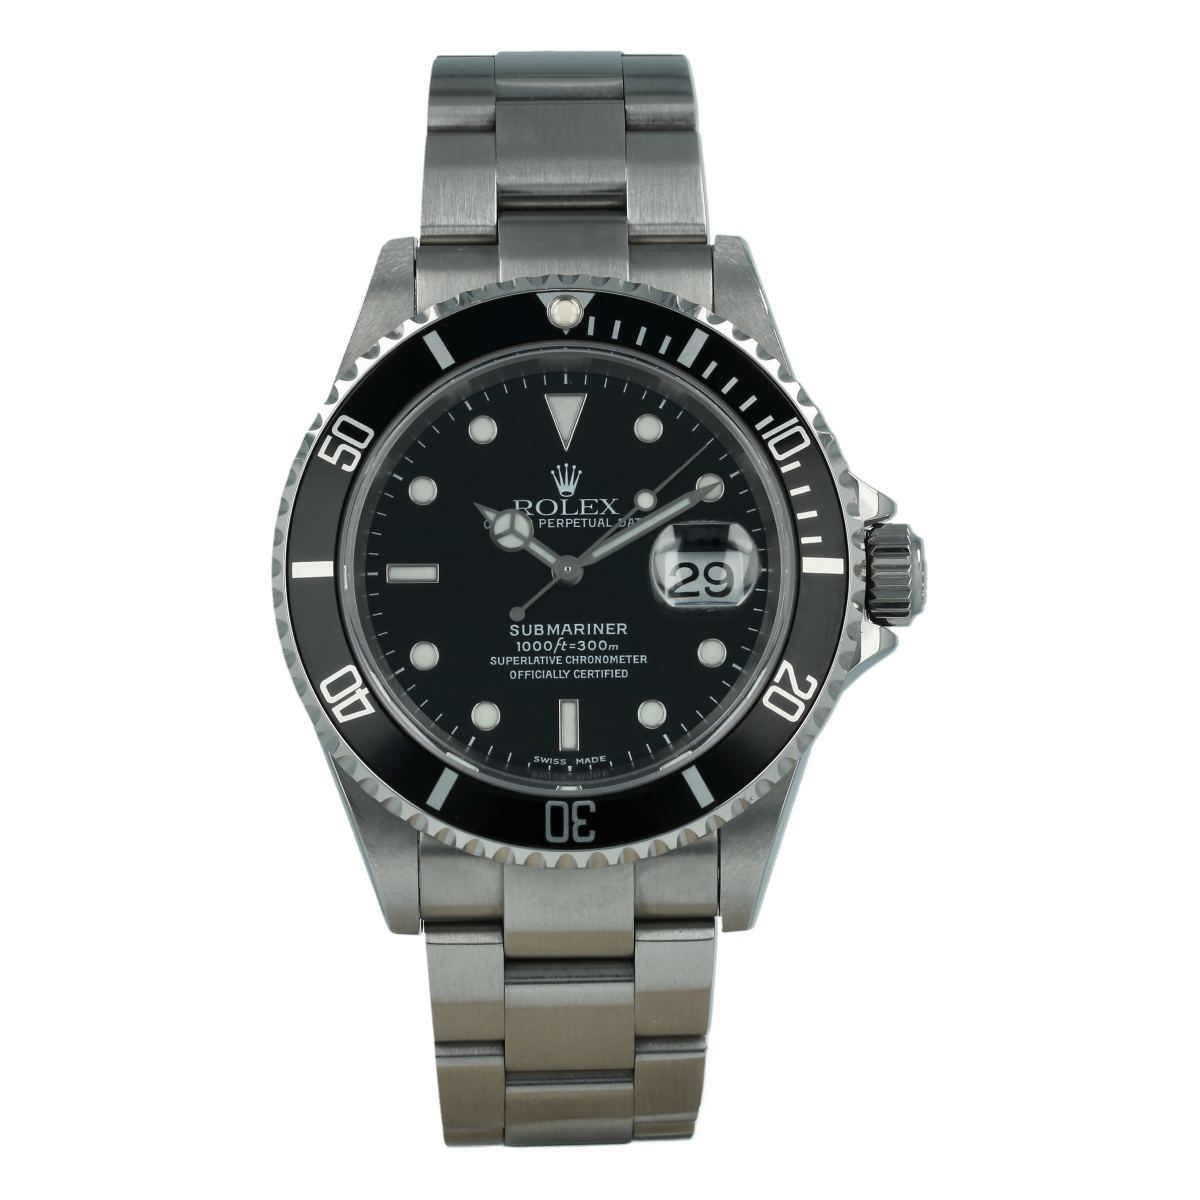 Submariner AP Watches Trading of watches from the best brands